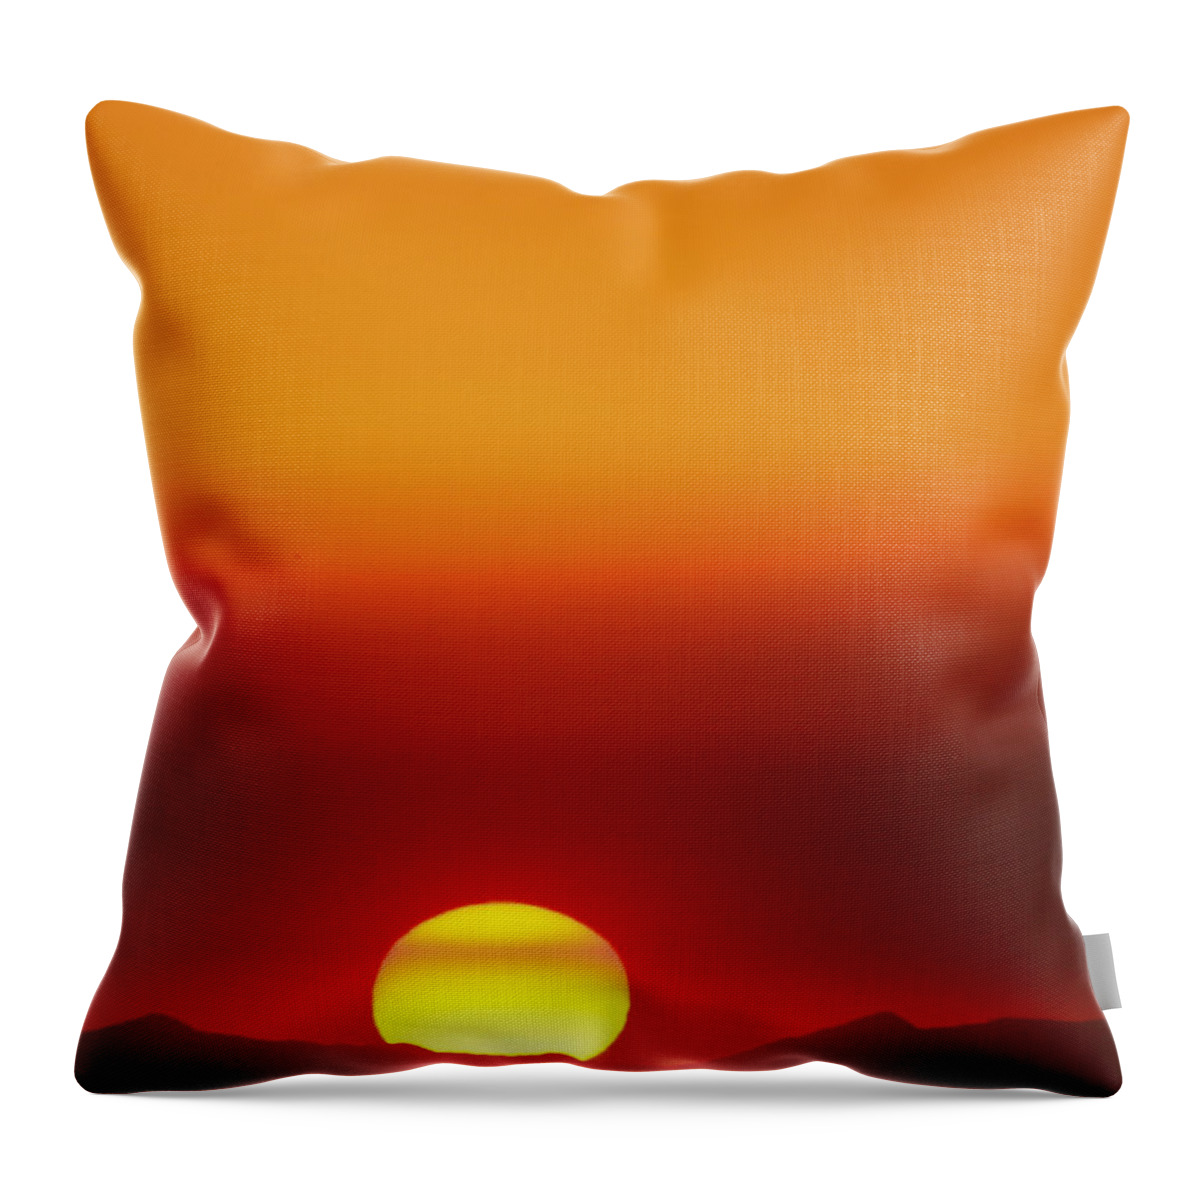 Catalina Sunset Throw Pillow featuring the photograph Catalina Sun by Andre Aleksis